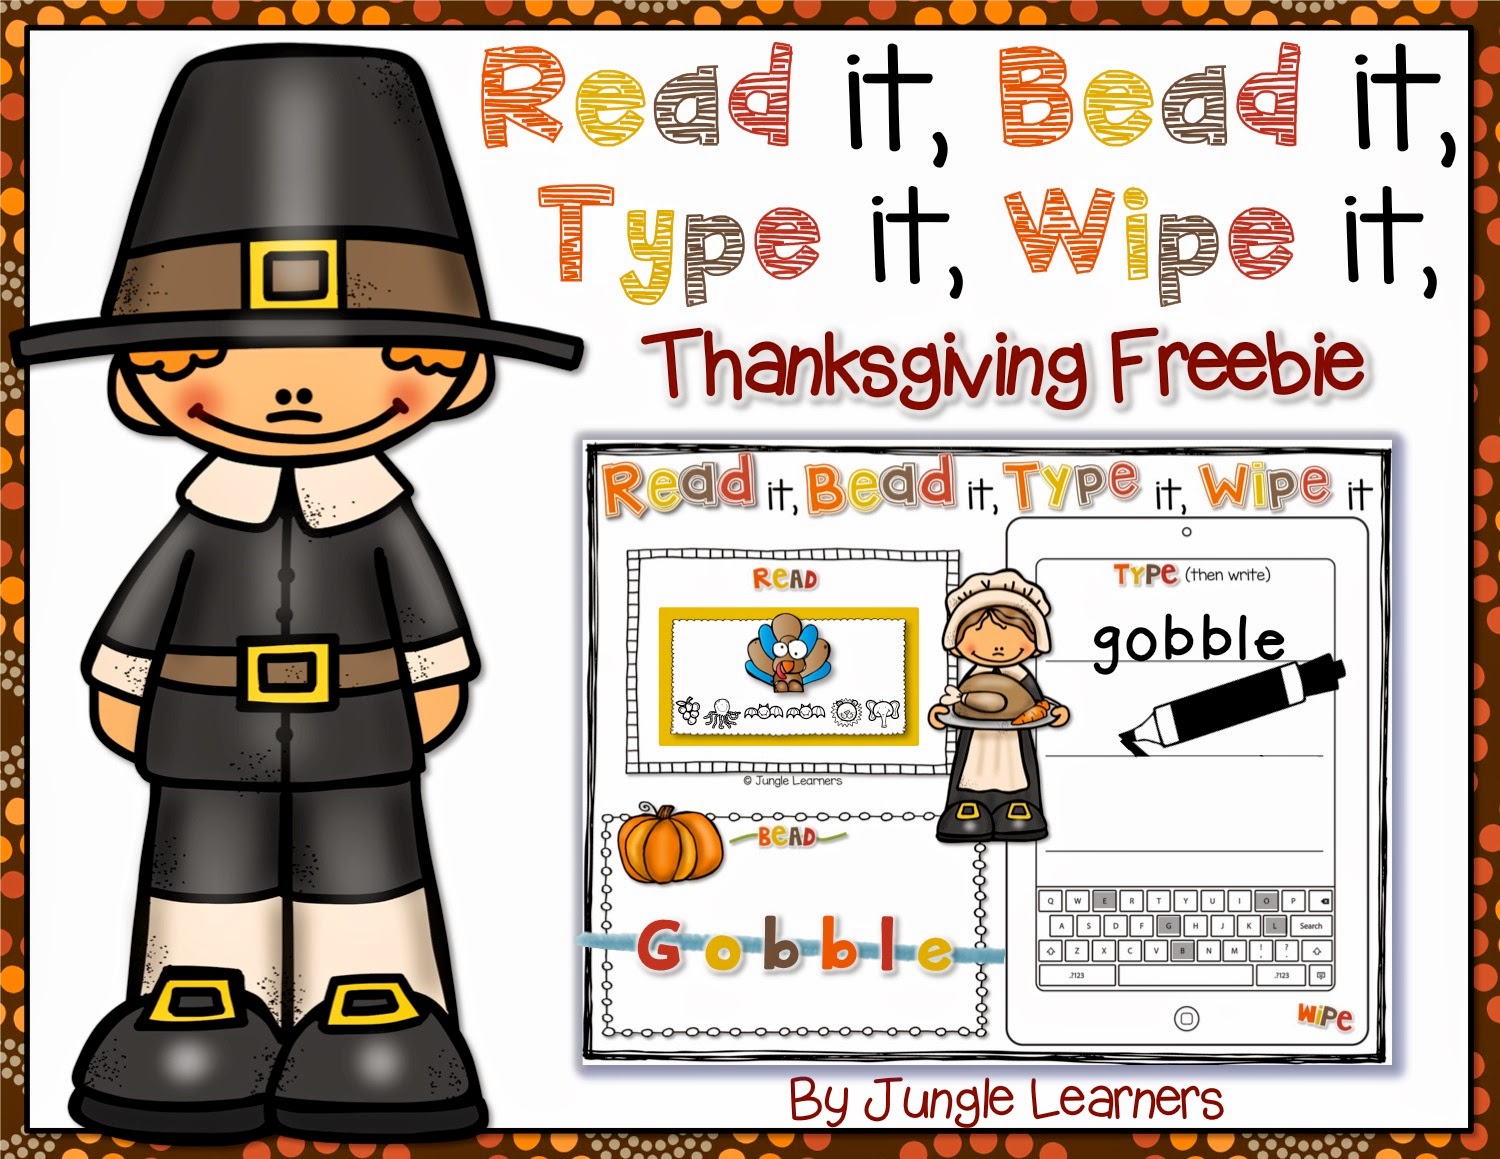  Read it, Bead it, Type it, Wipe it Thanksgiving Edition. A fun and engaging literacy center!